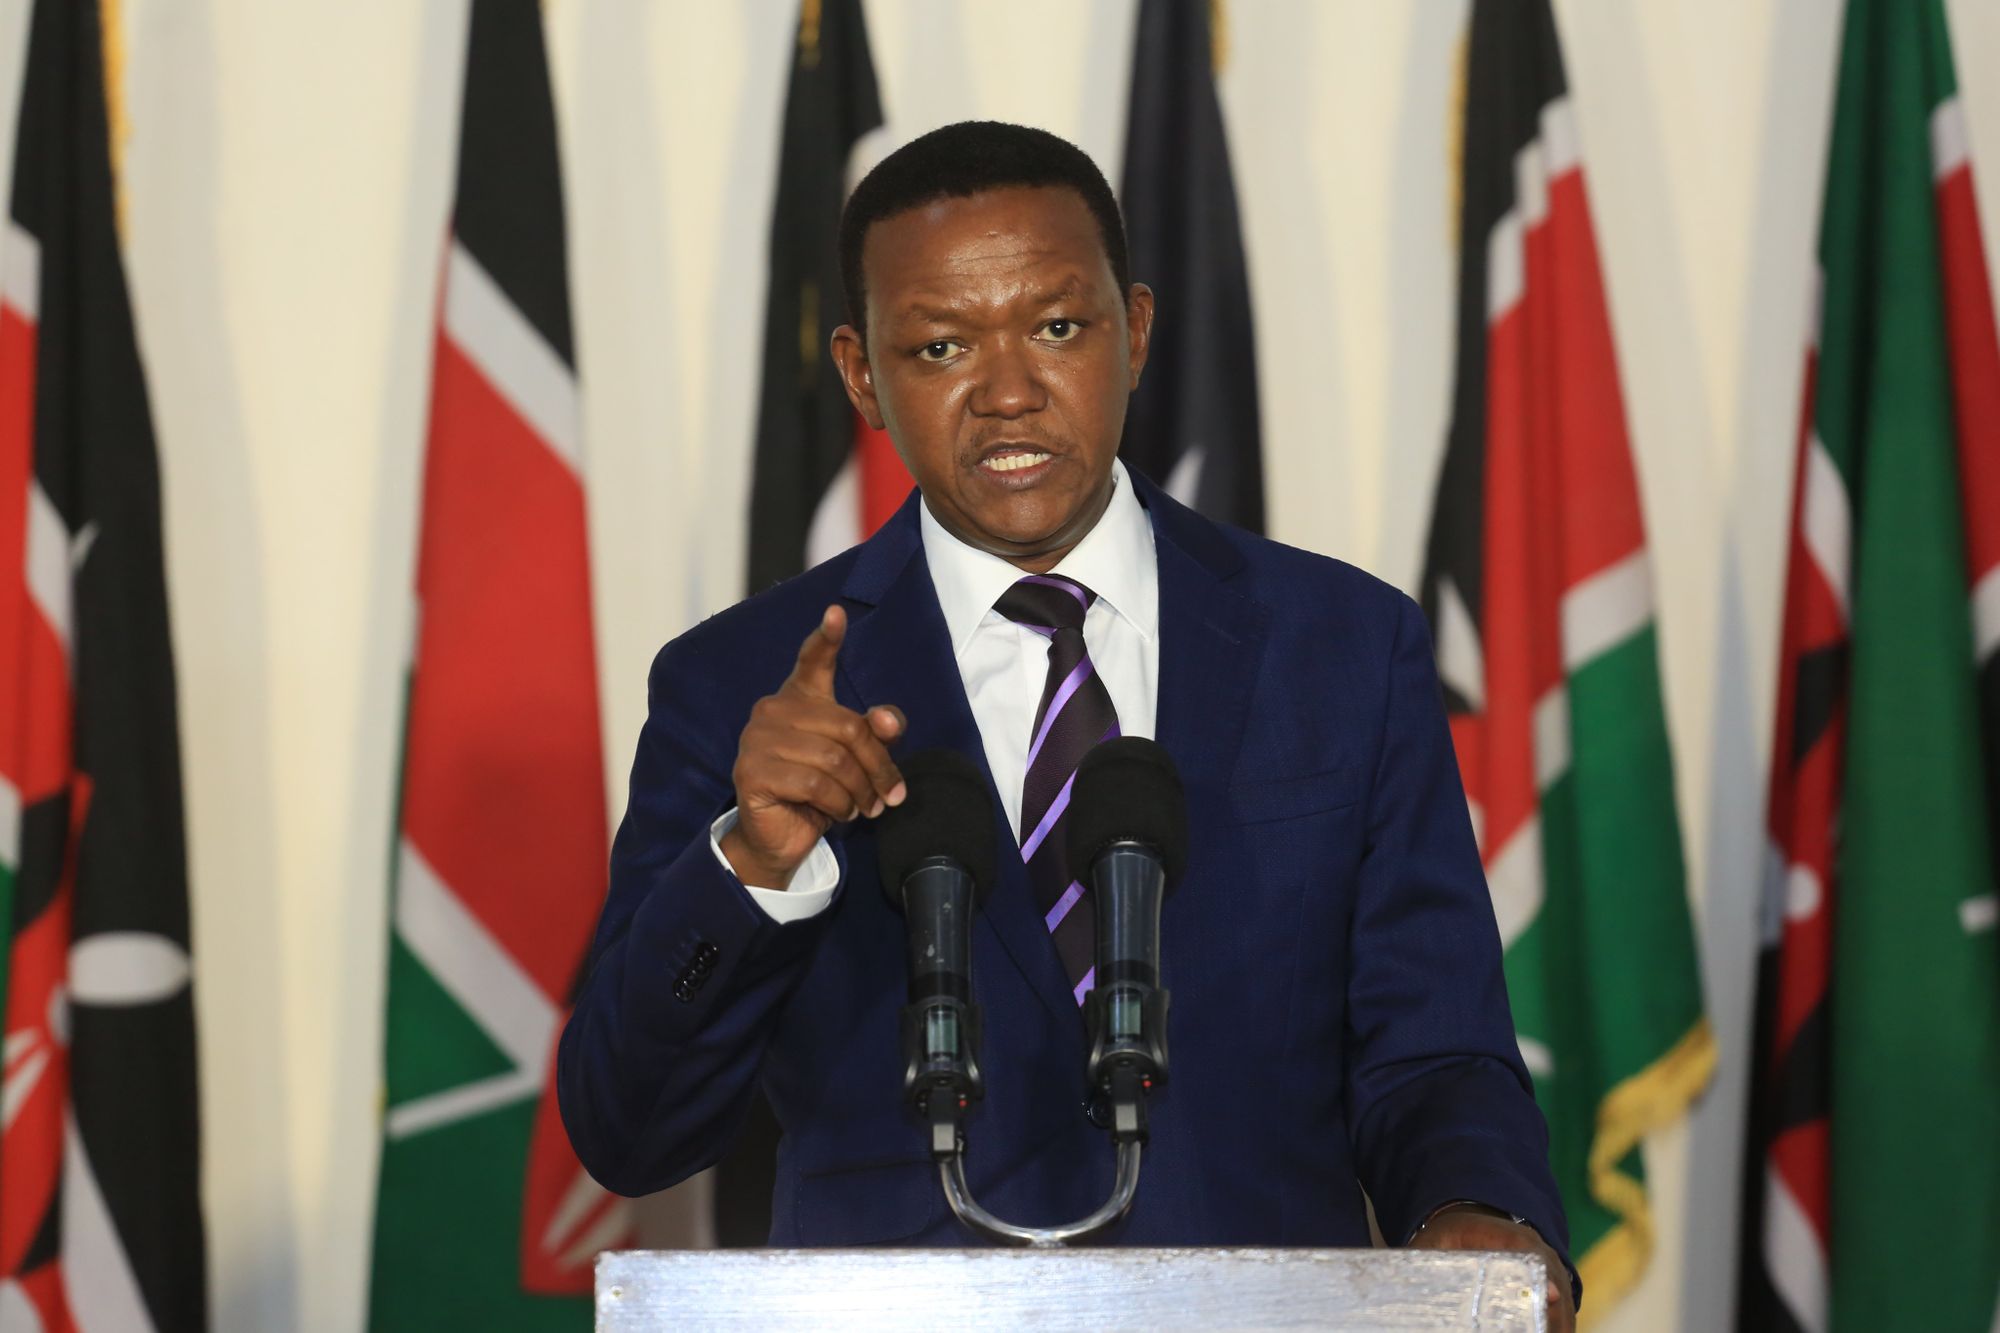 Alfred Mutua to create 5 million jobs after becoming president